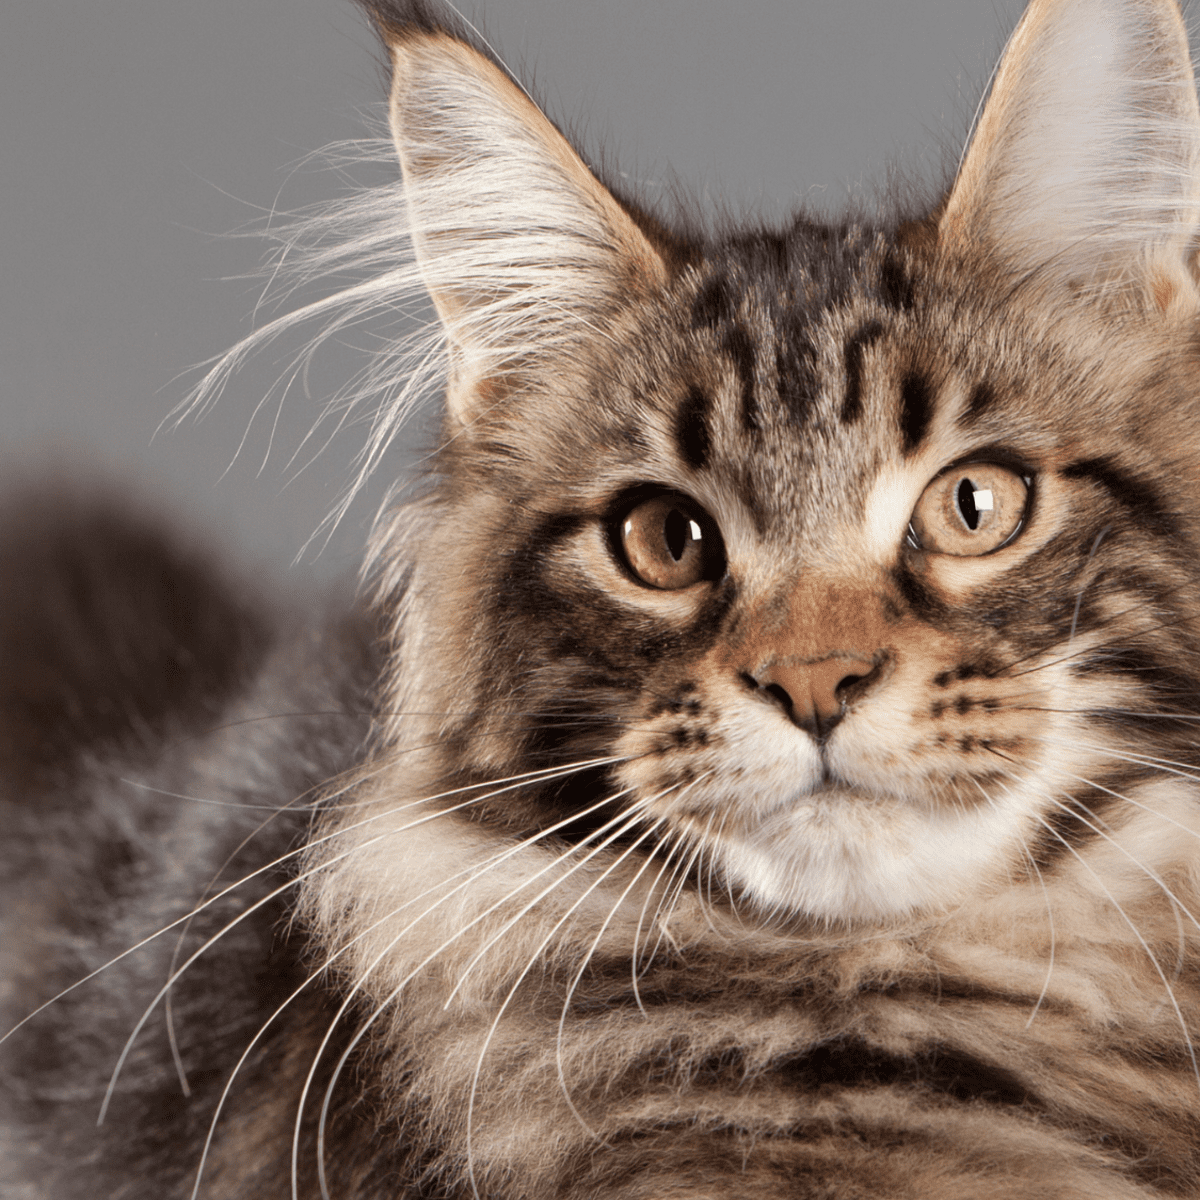 maine coons for adoption